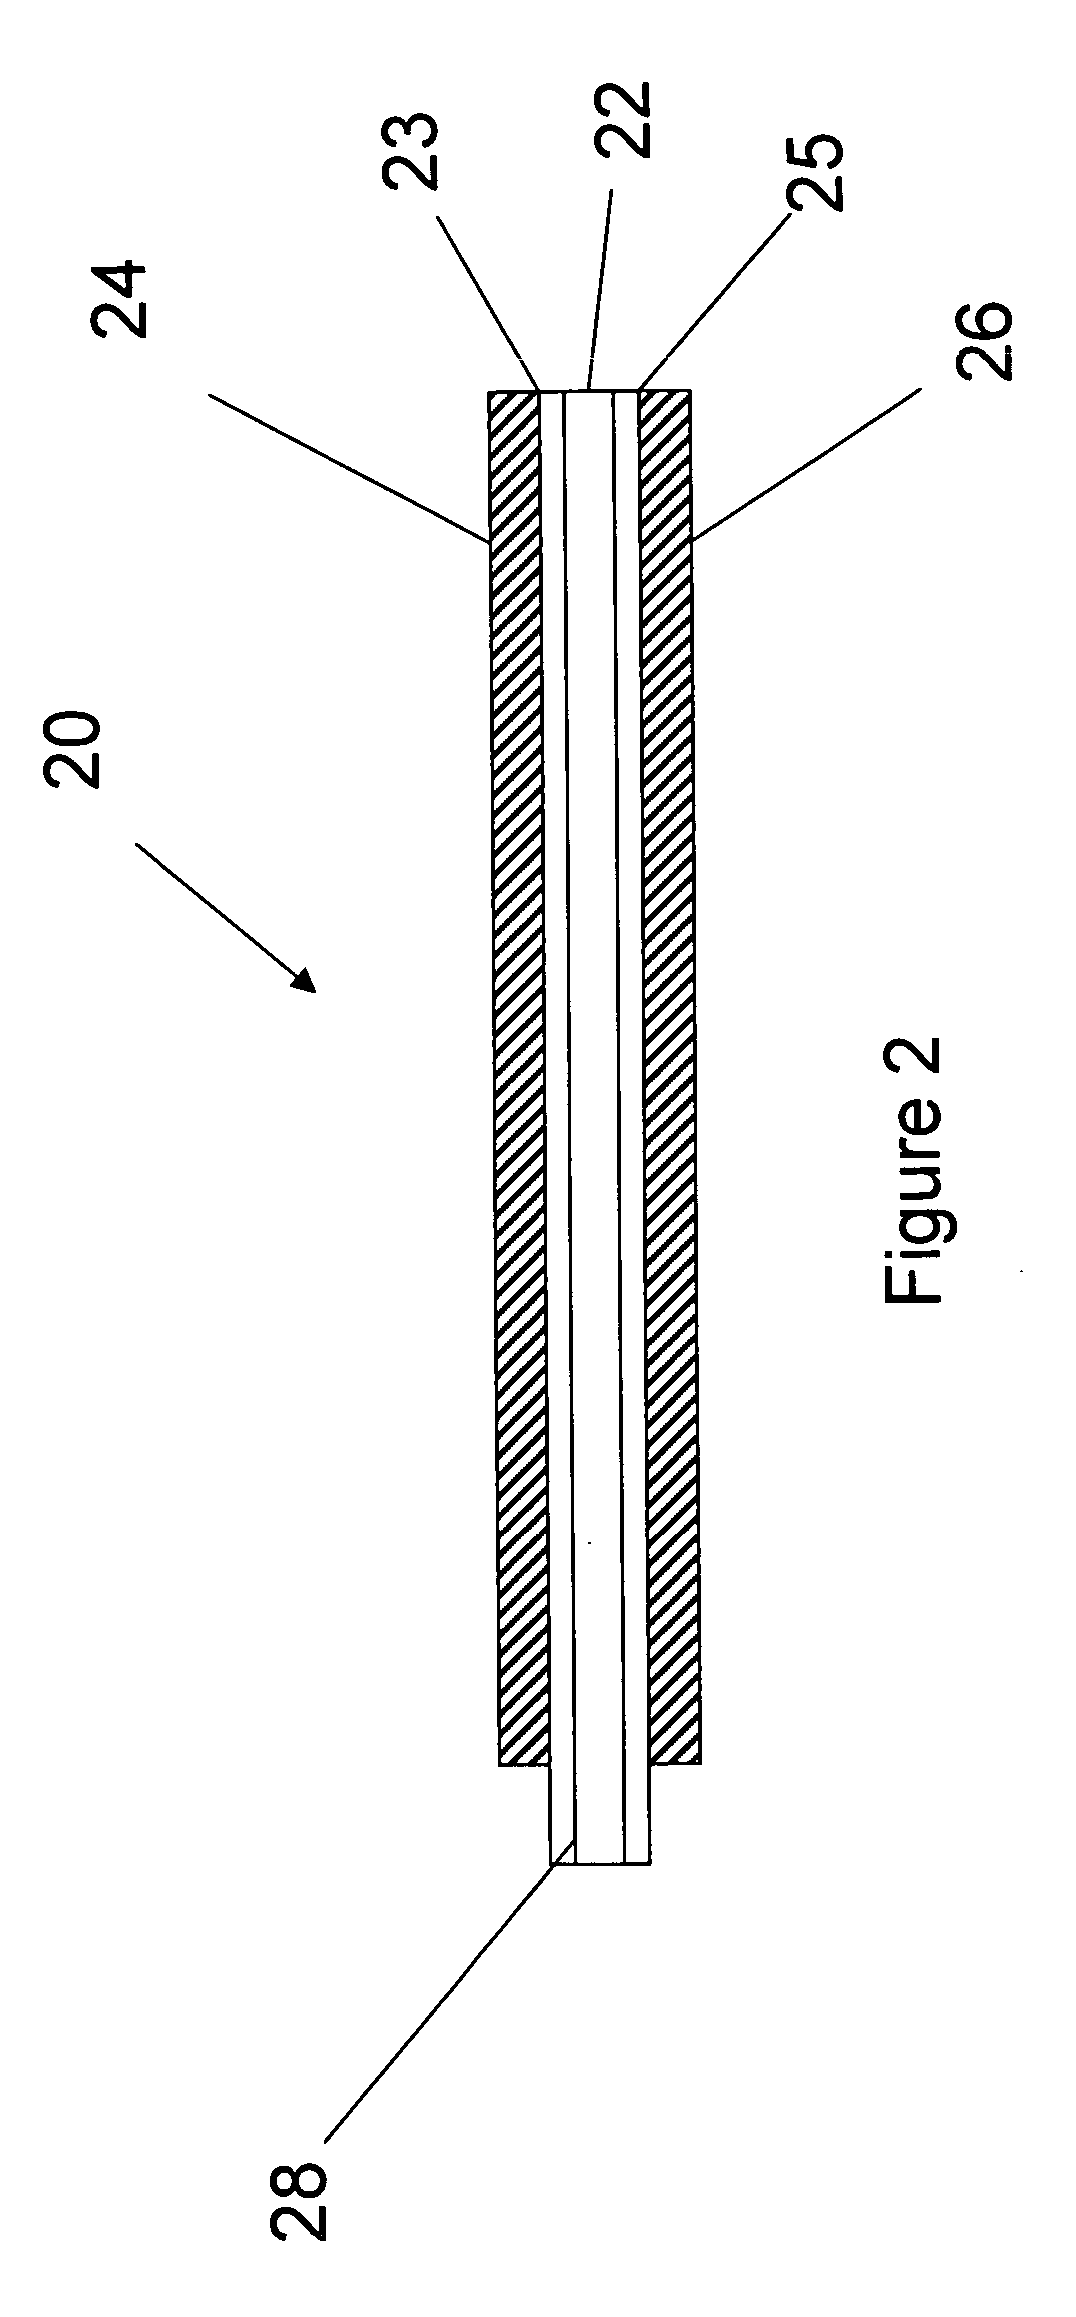 Flexible dielectric film and method for making